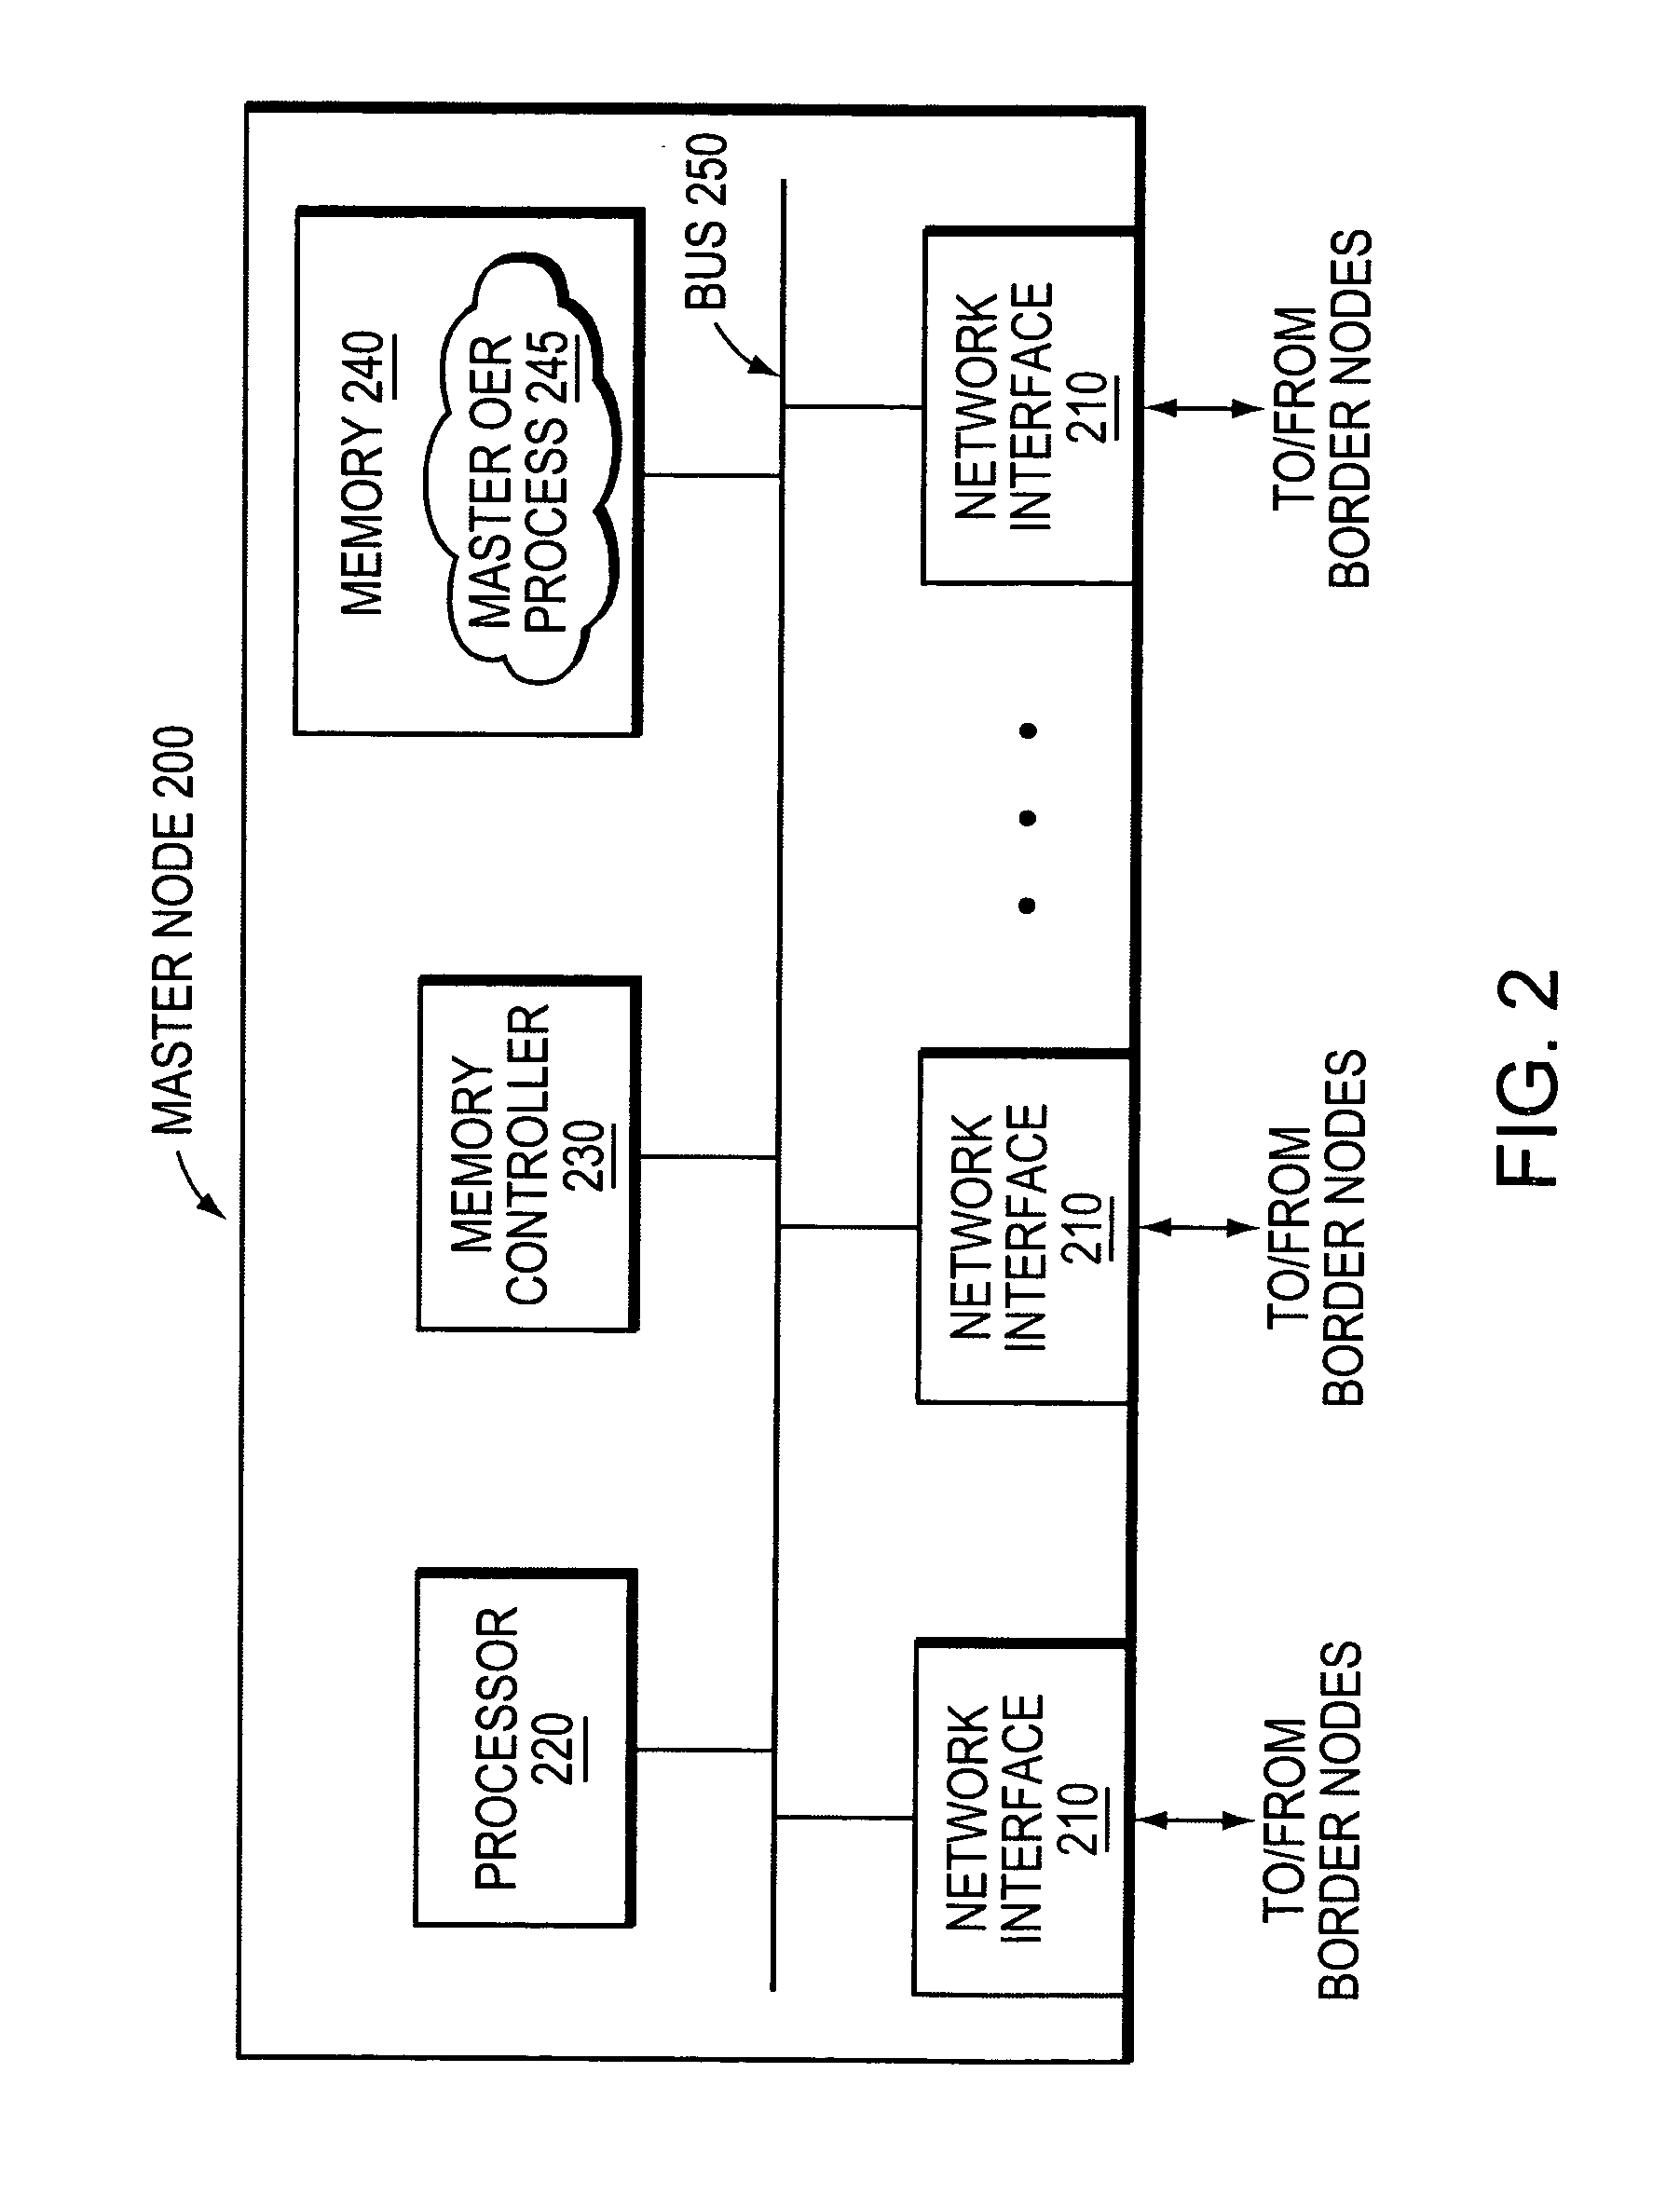 Method and apparatus for automatically optimizing routing operations at the edge of a network